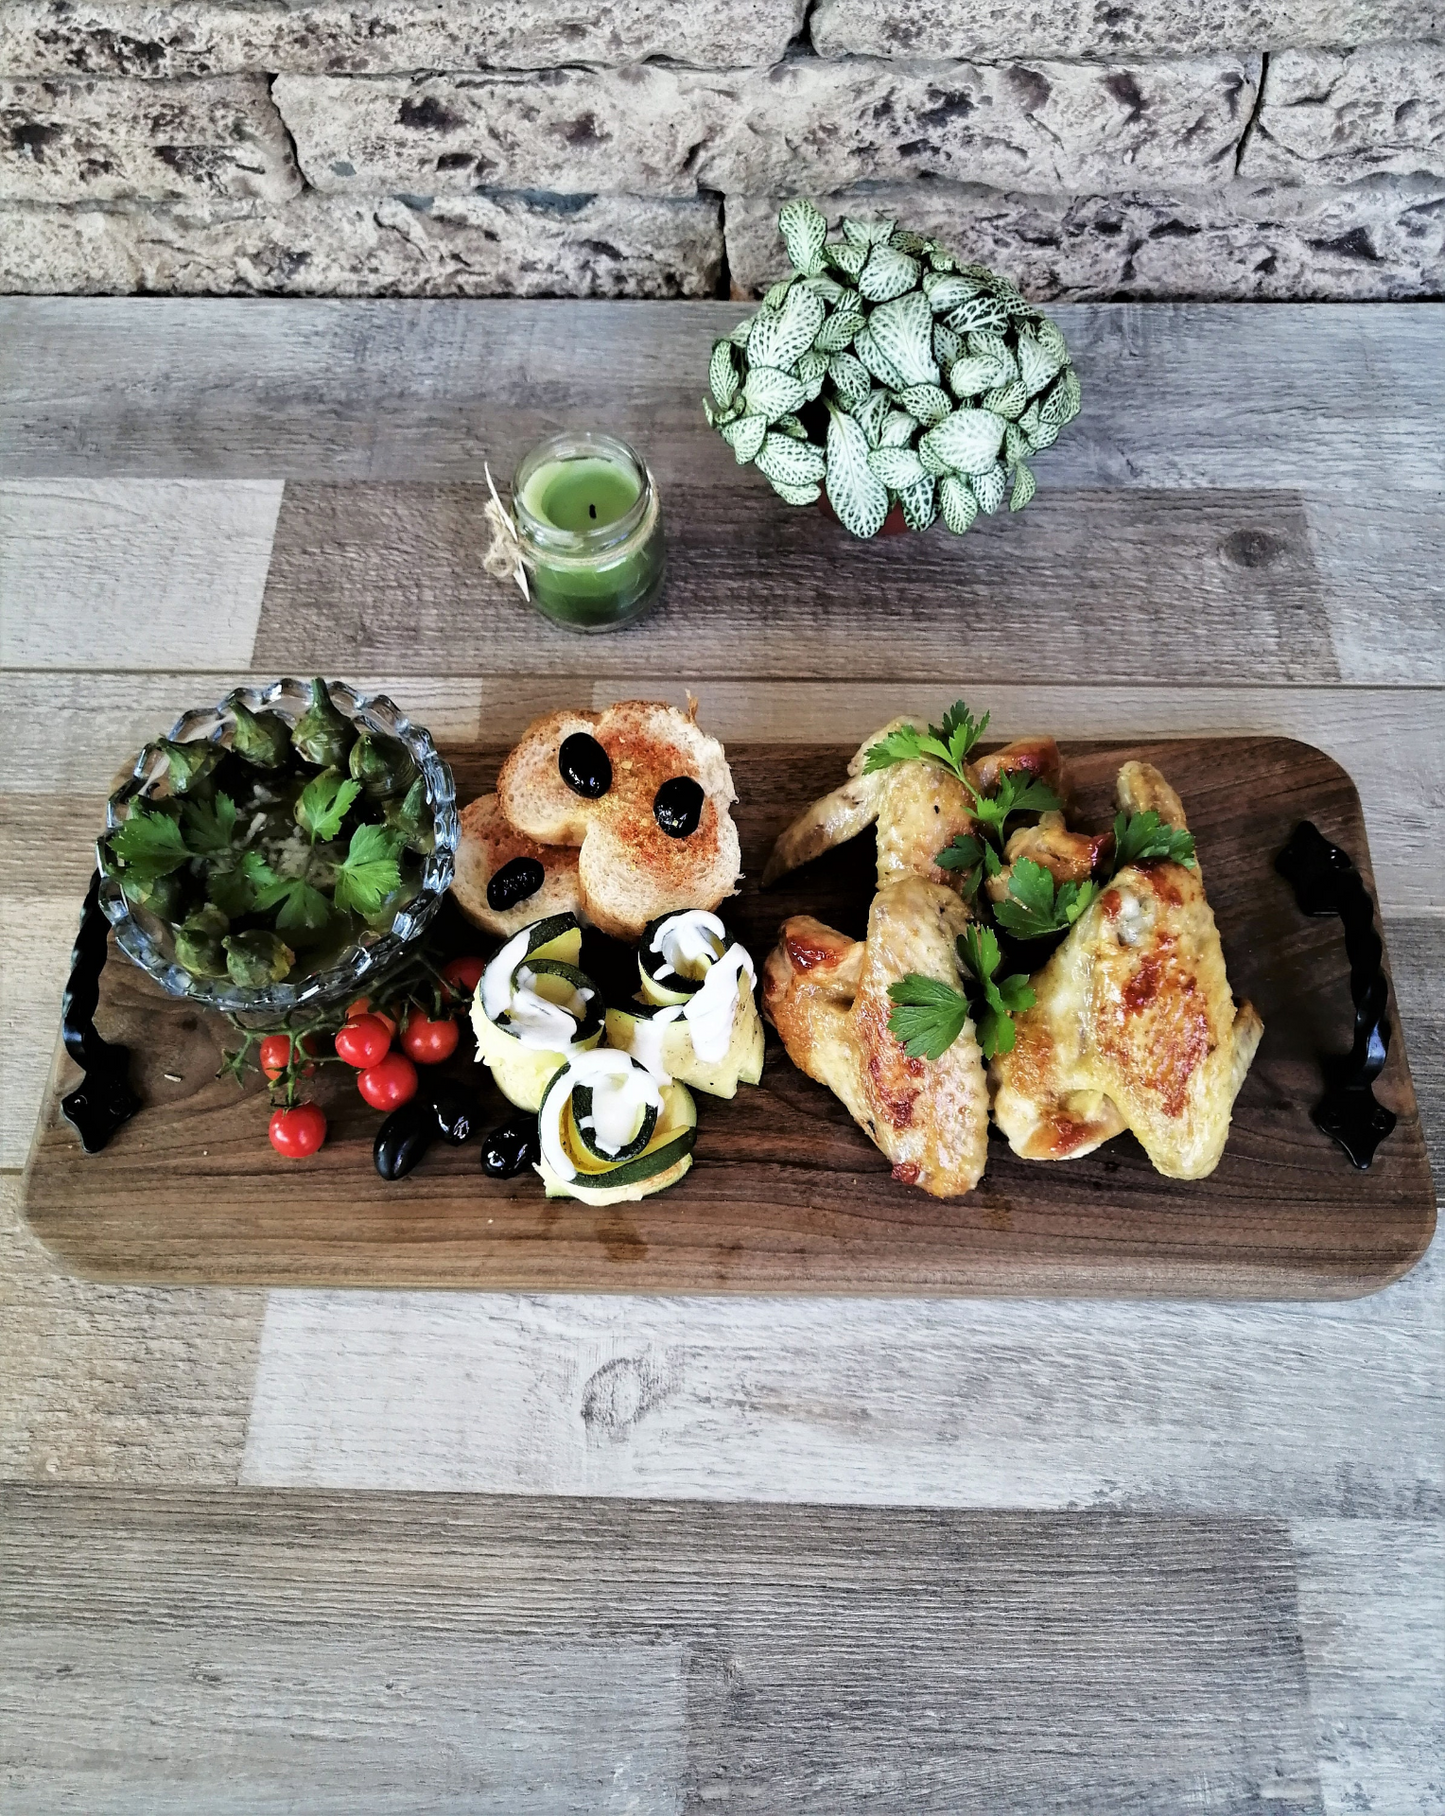 Large Serving Board Catering Extra Long Tray Charcuterie Platter With Handles Gift Idea